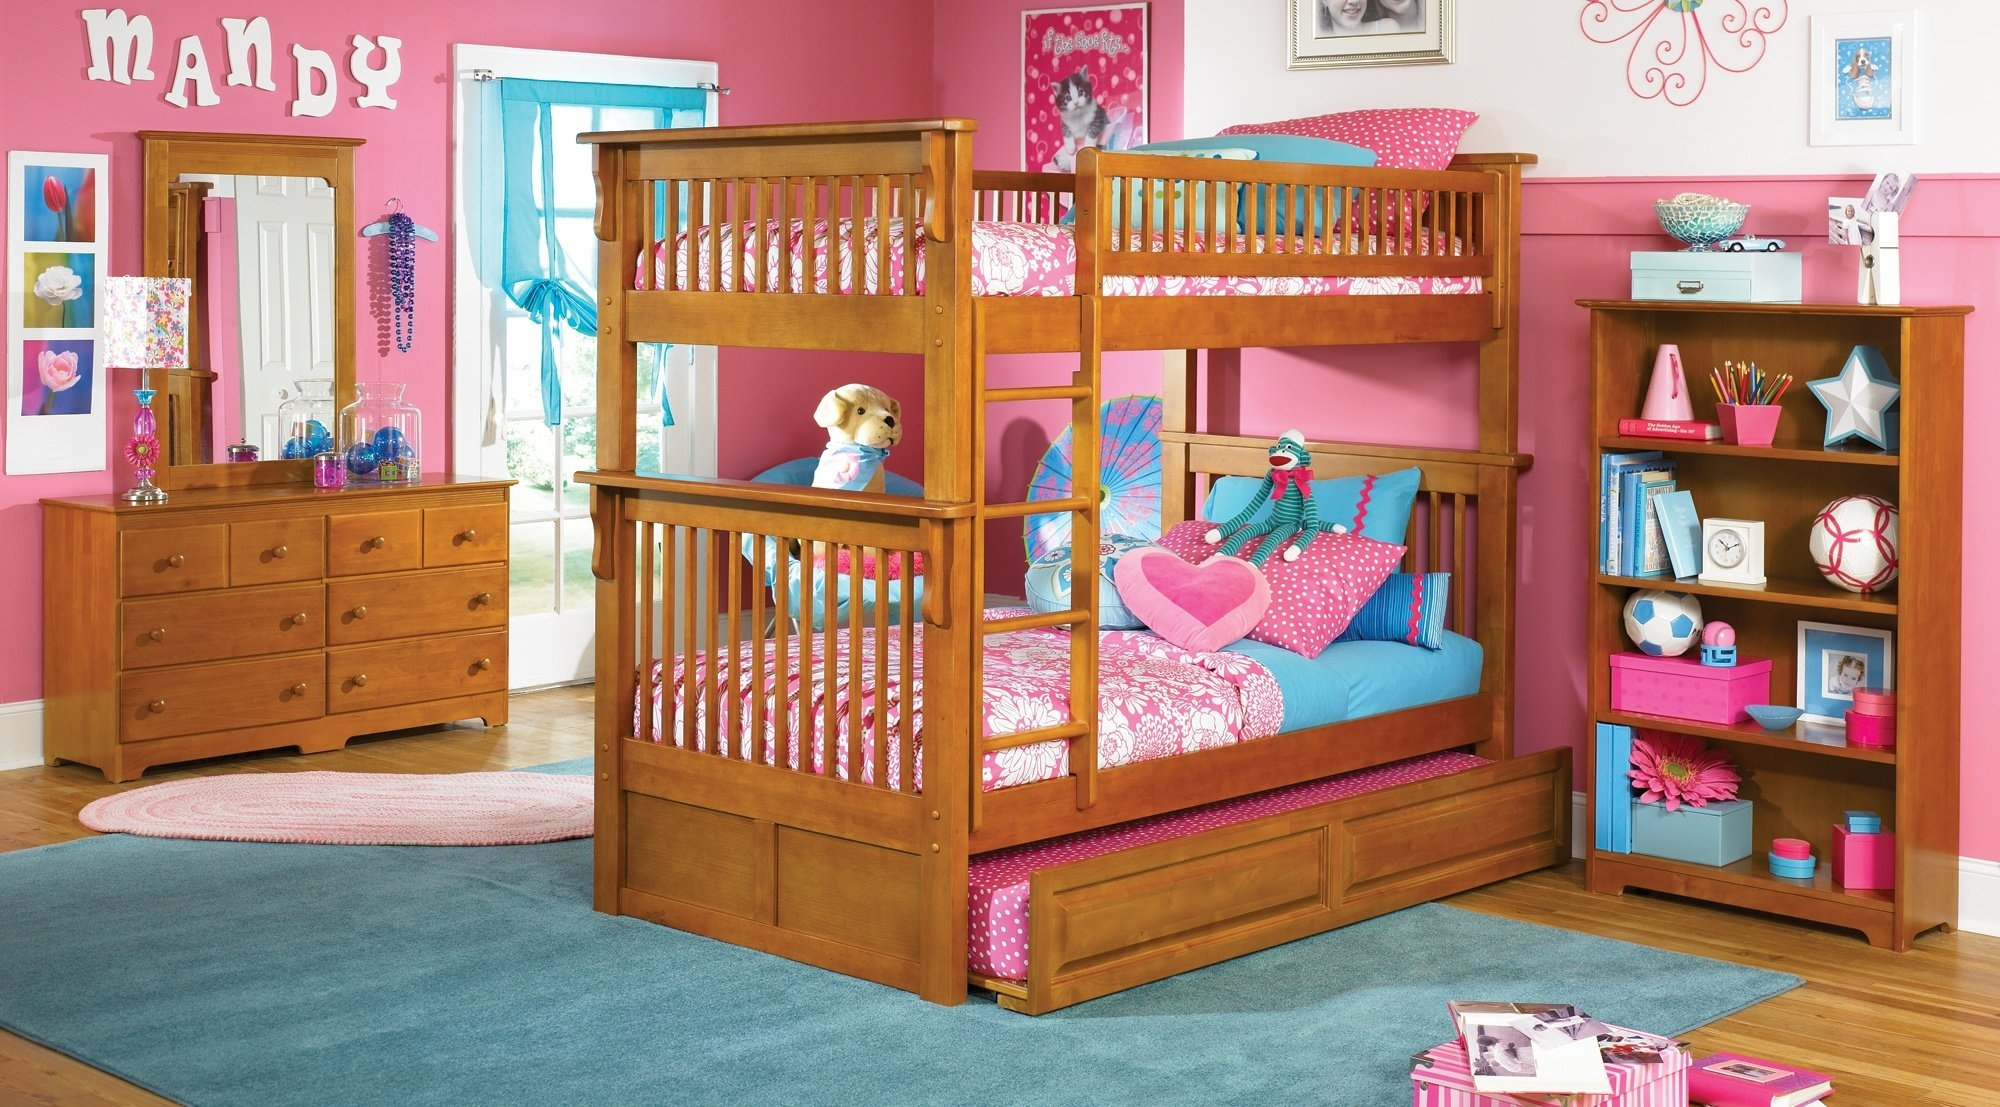 Cool Kids Bedroom For Boy With Blue Bedding Set And Yello Excerpt pertaining to dimensions 2000 X 1107